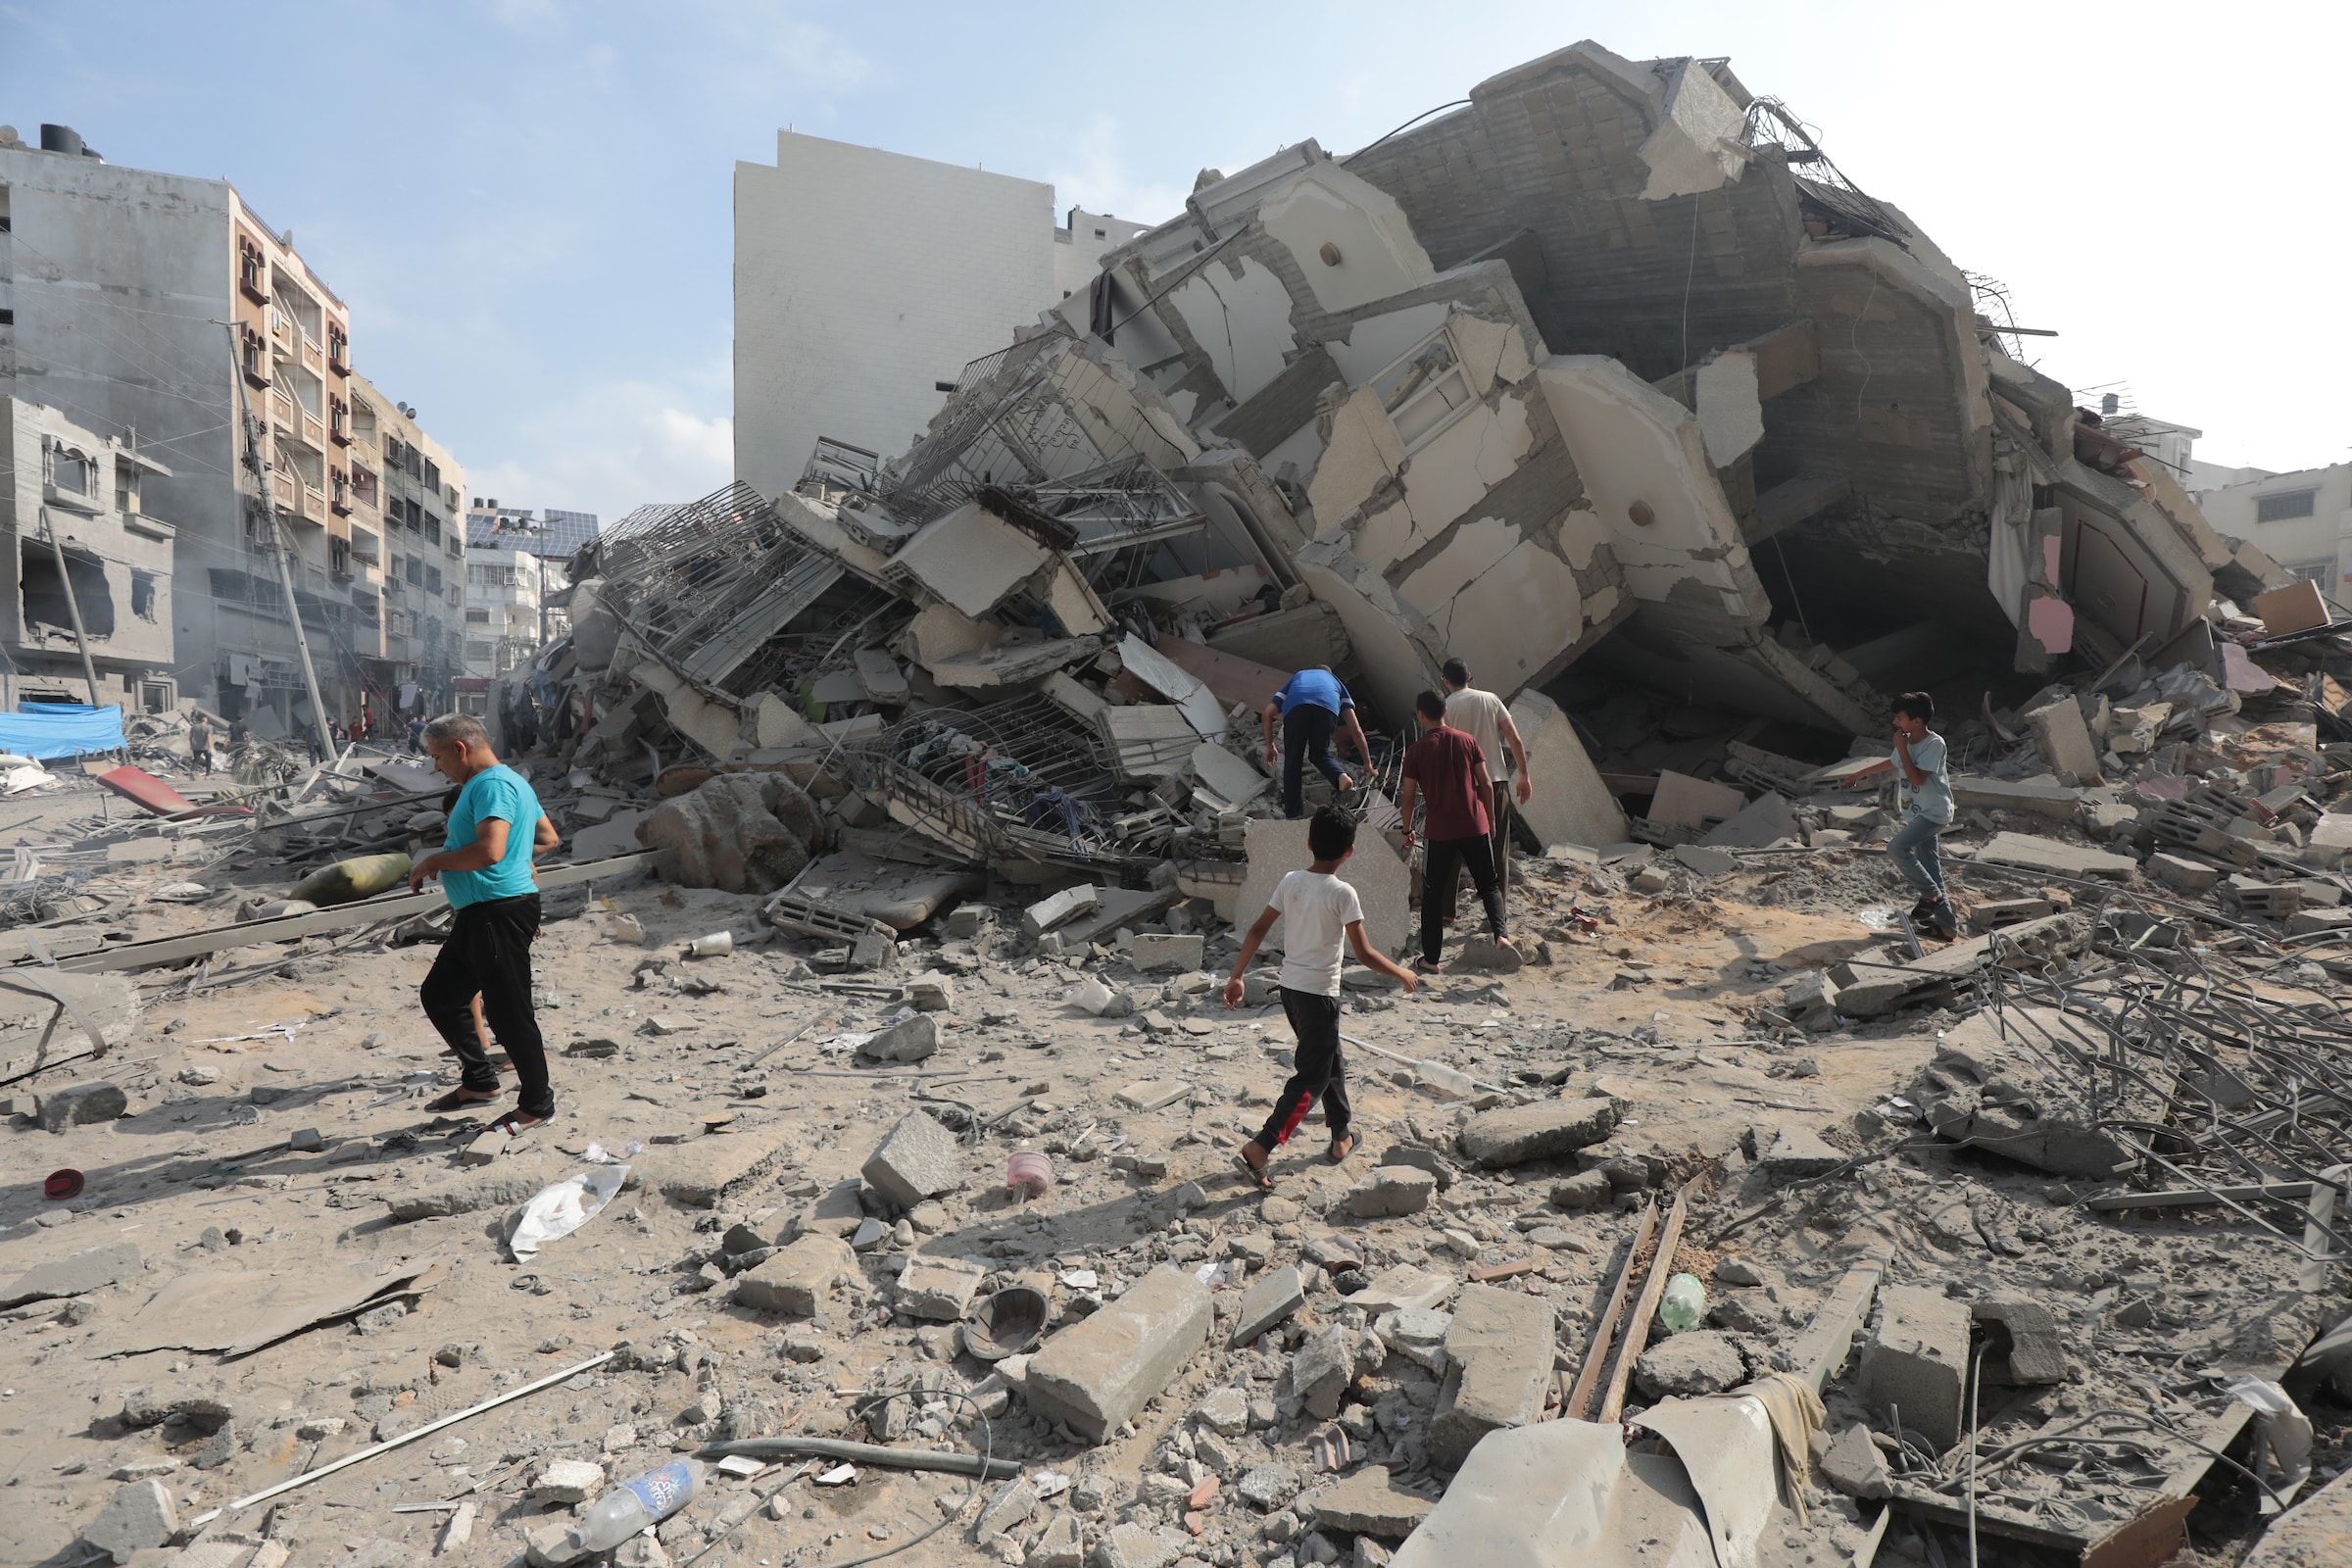 palestinians inspect the ruins of aklouk tower destroyed in israeli airstrikes in gaza city